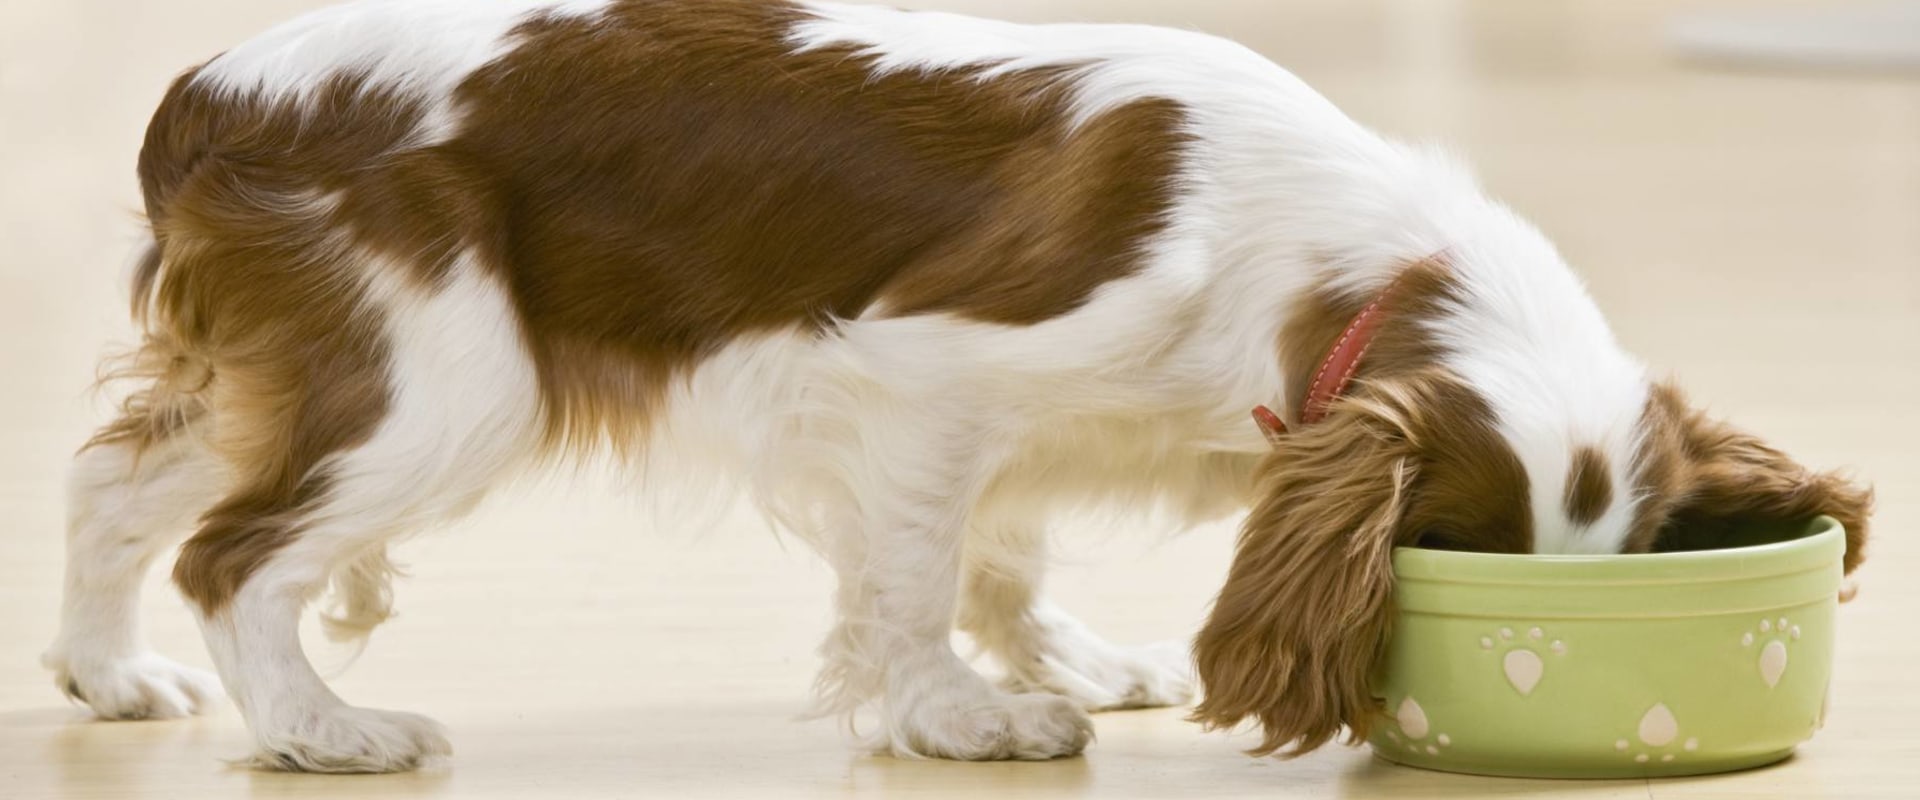 What dog foods should you stay away from?